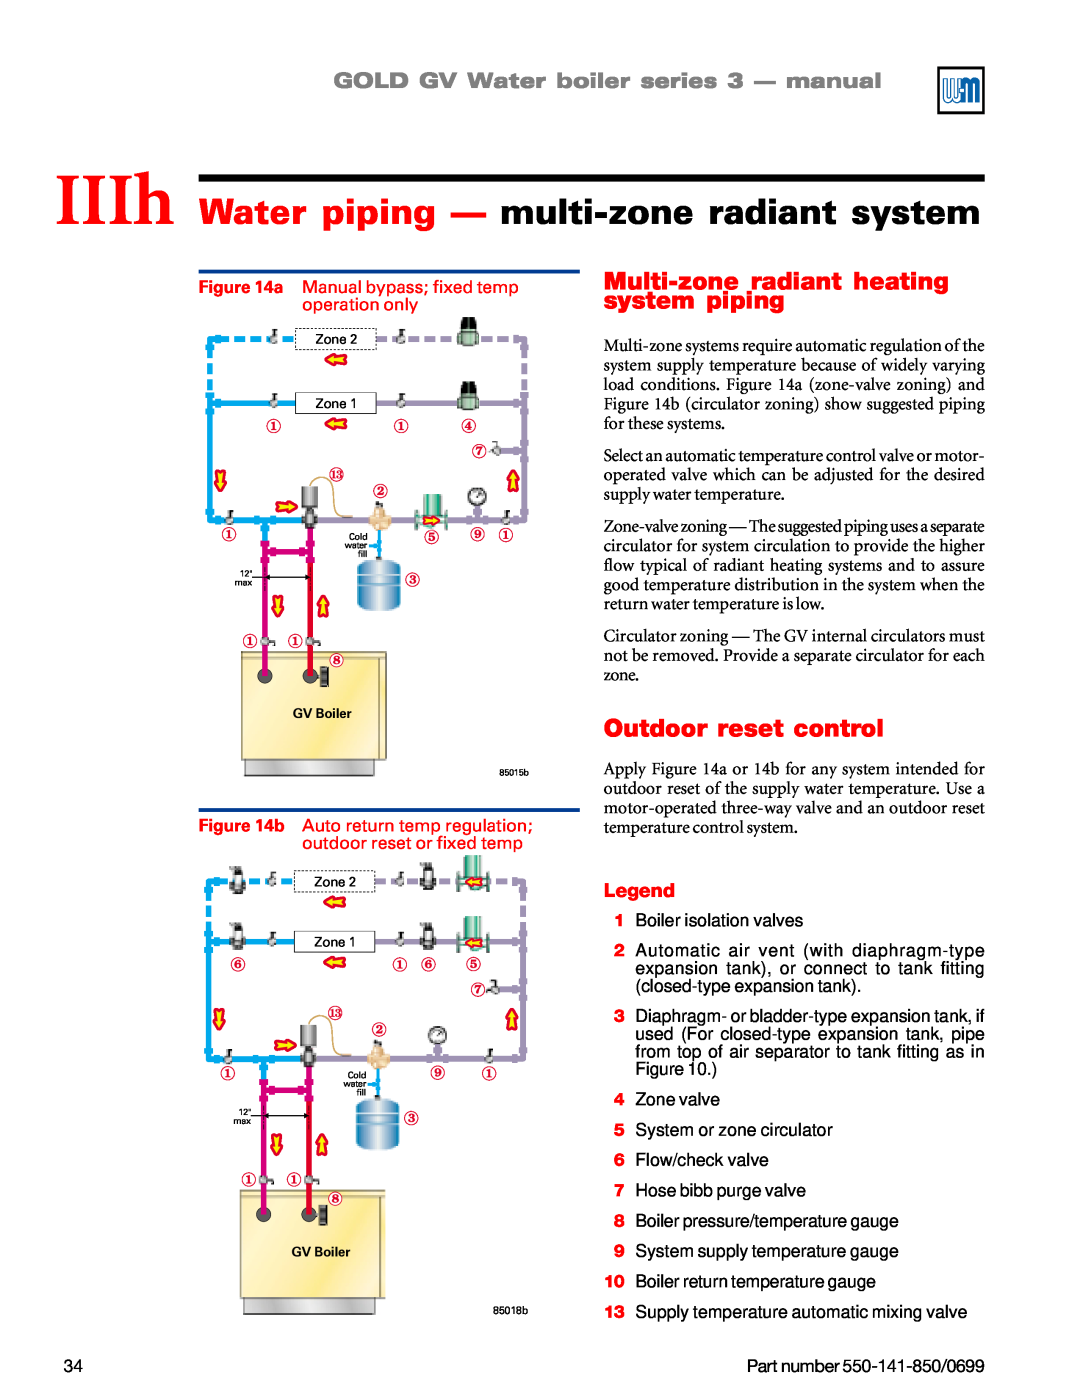 Weil-McLain GOLD DV WATER BOILER IIIh Water piping — multi-zoneradiant system, Multi-zoneradiant heating system piping 